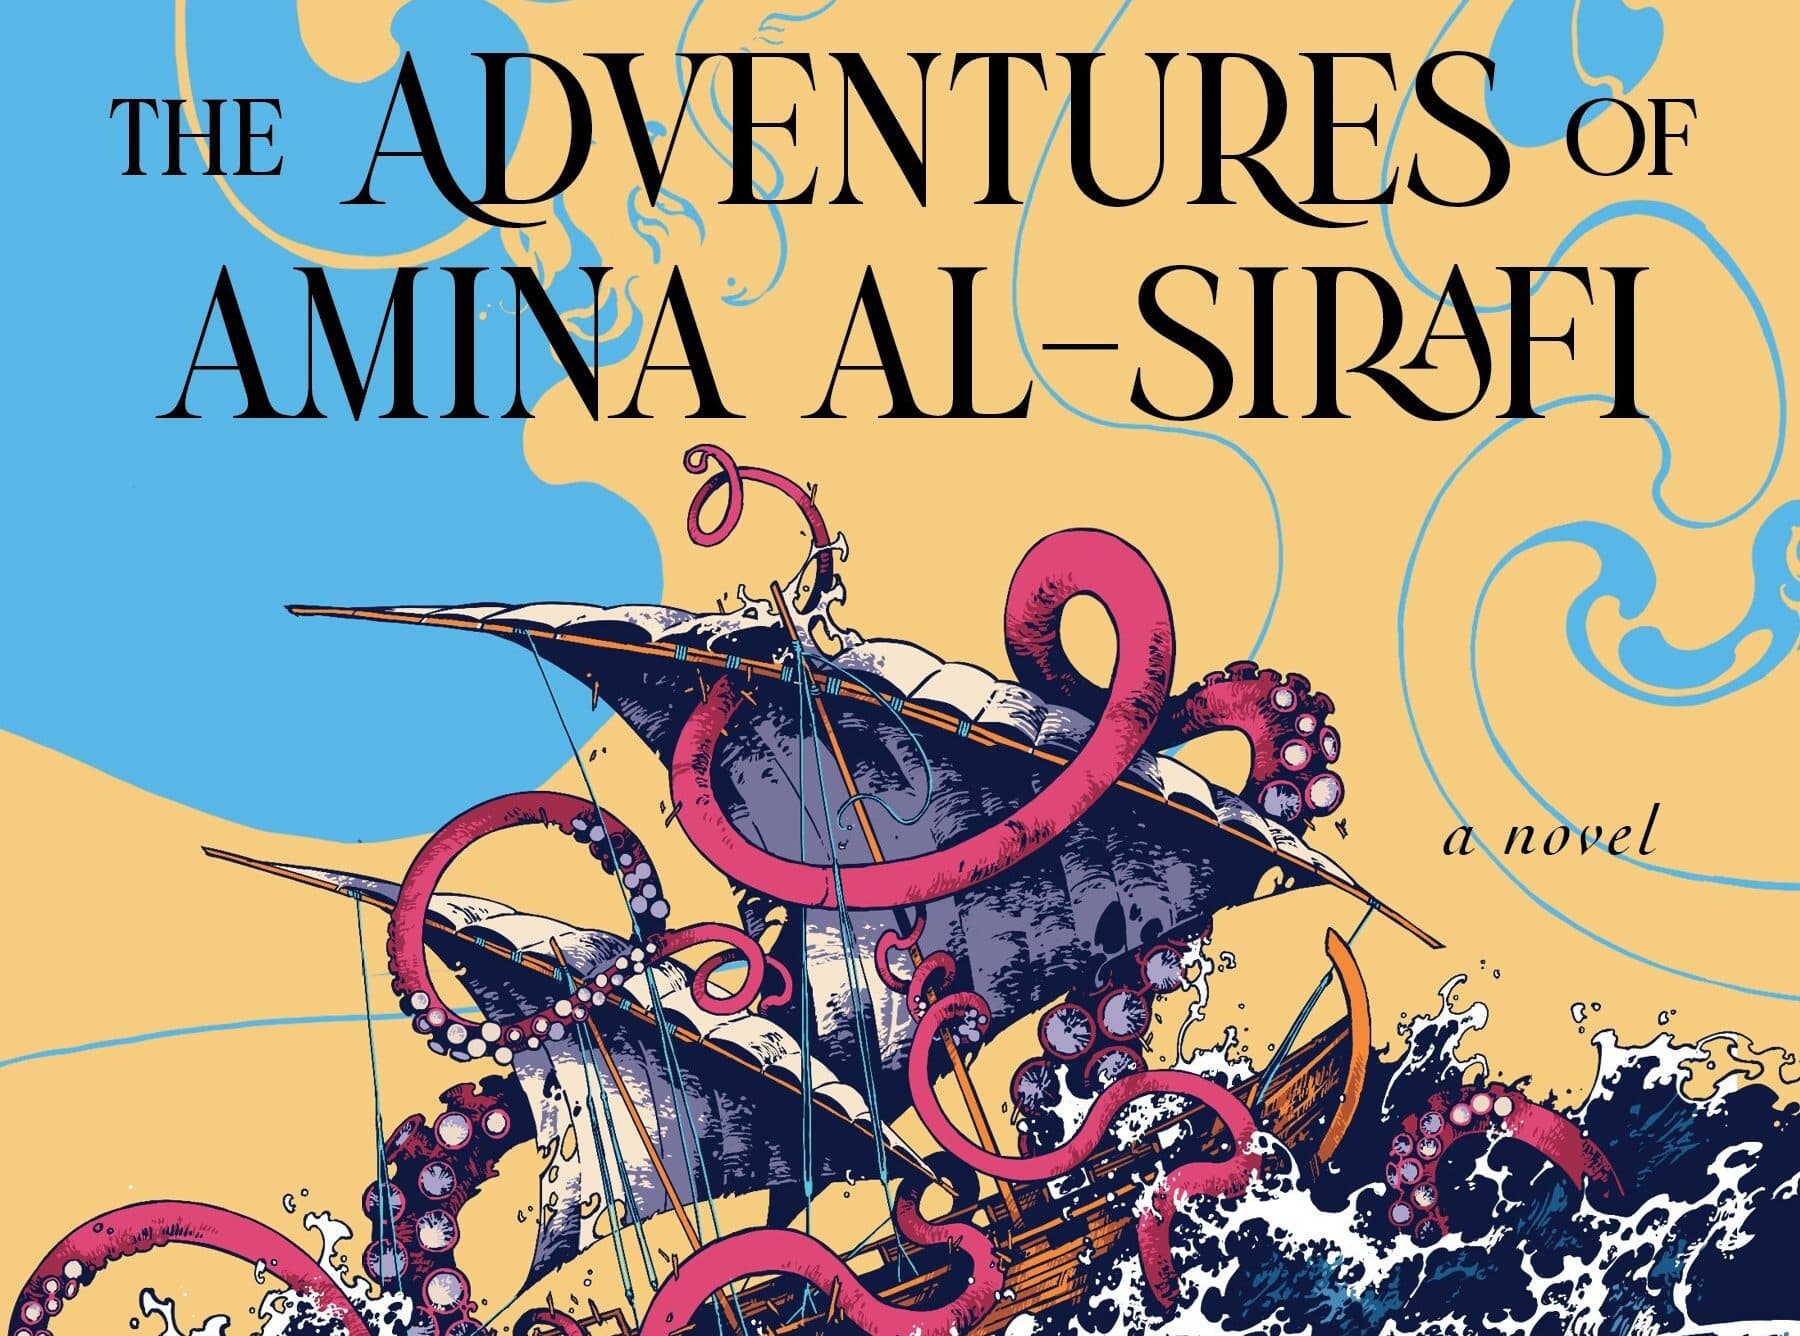 &quot;The Adventures of Amina Al-Sirafi&quot; book cover. (Courtesy of Harper Voyager, an imprint of HarperCollins Publishers)